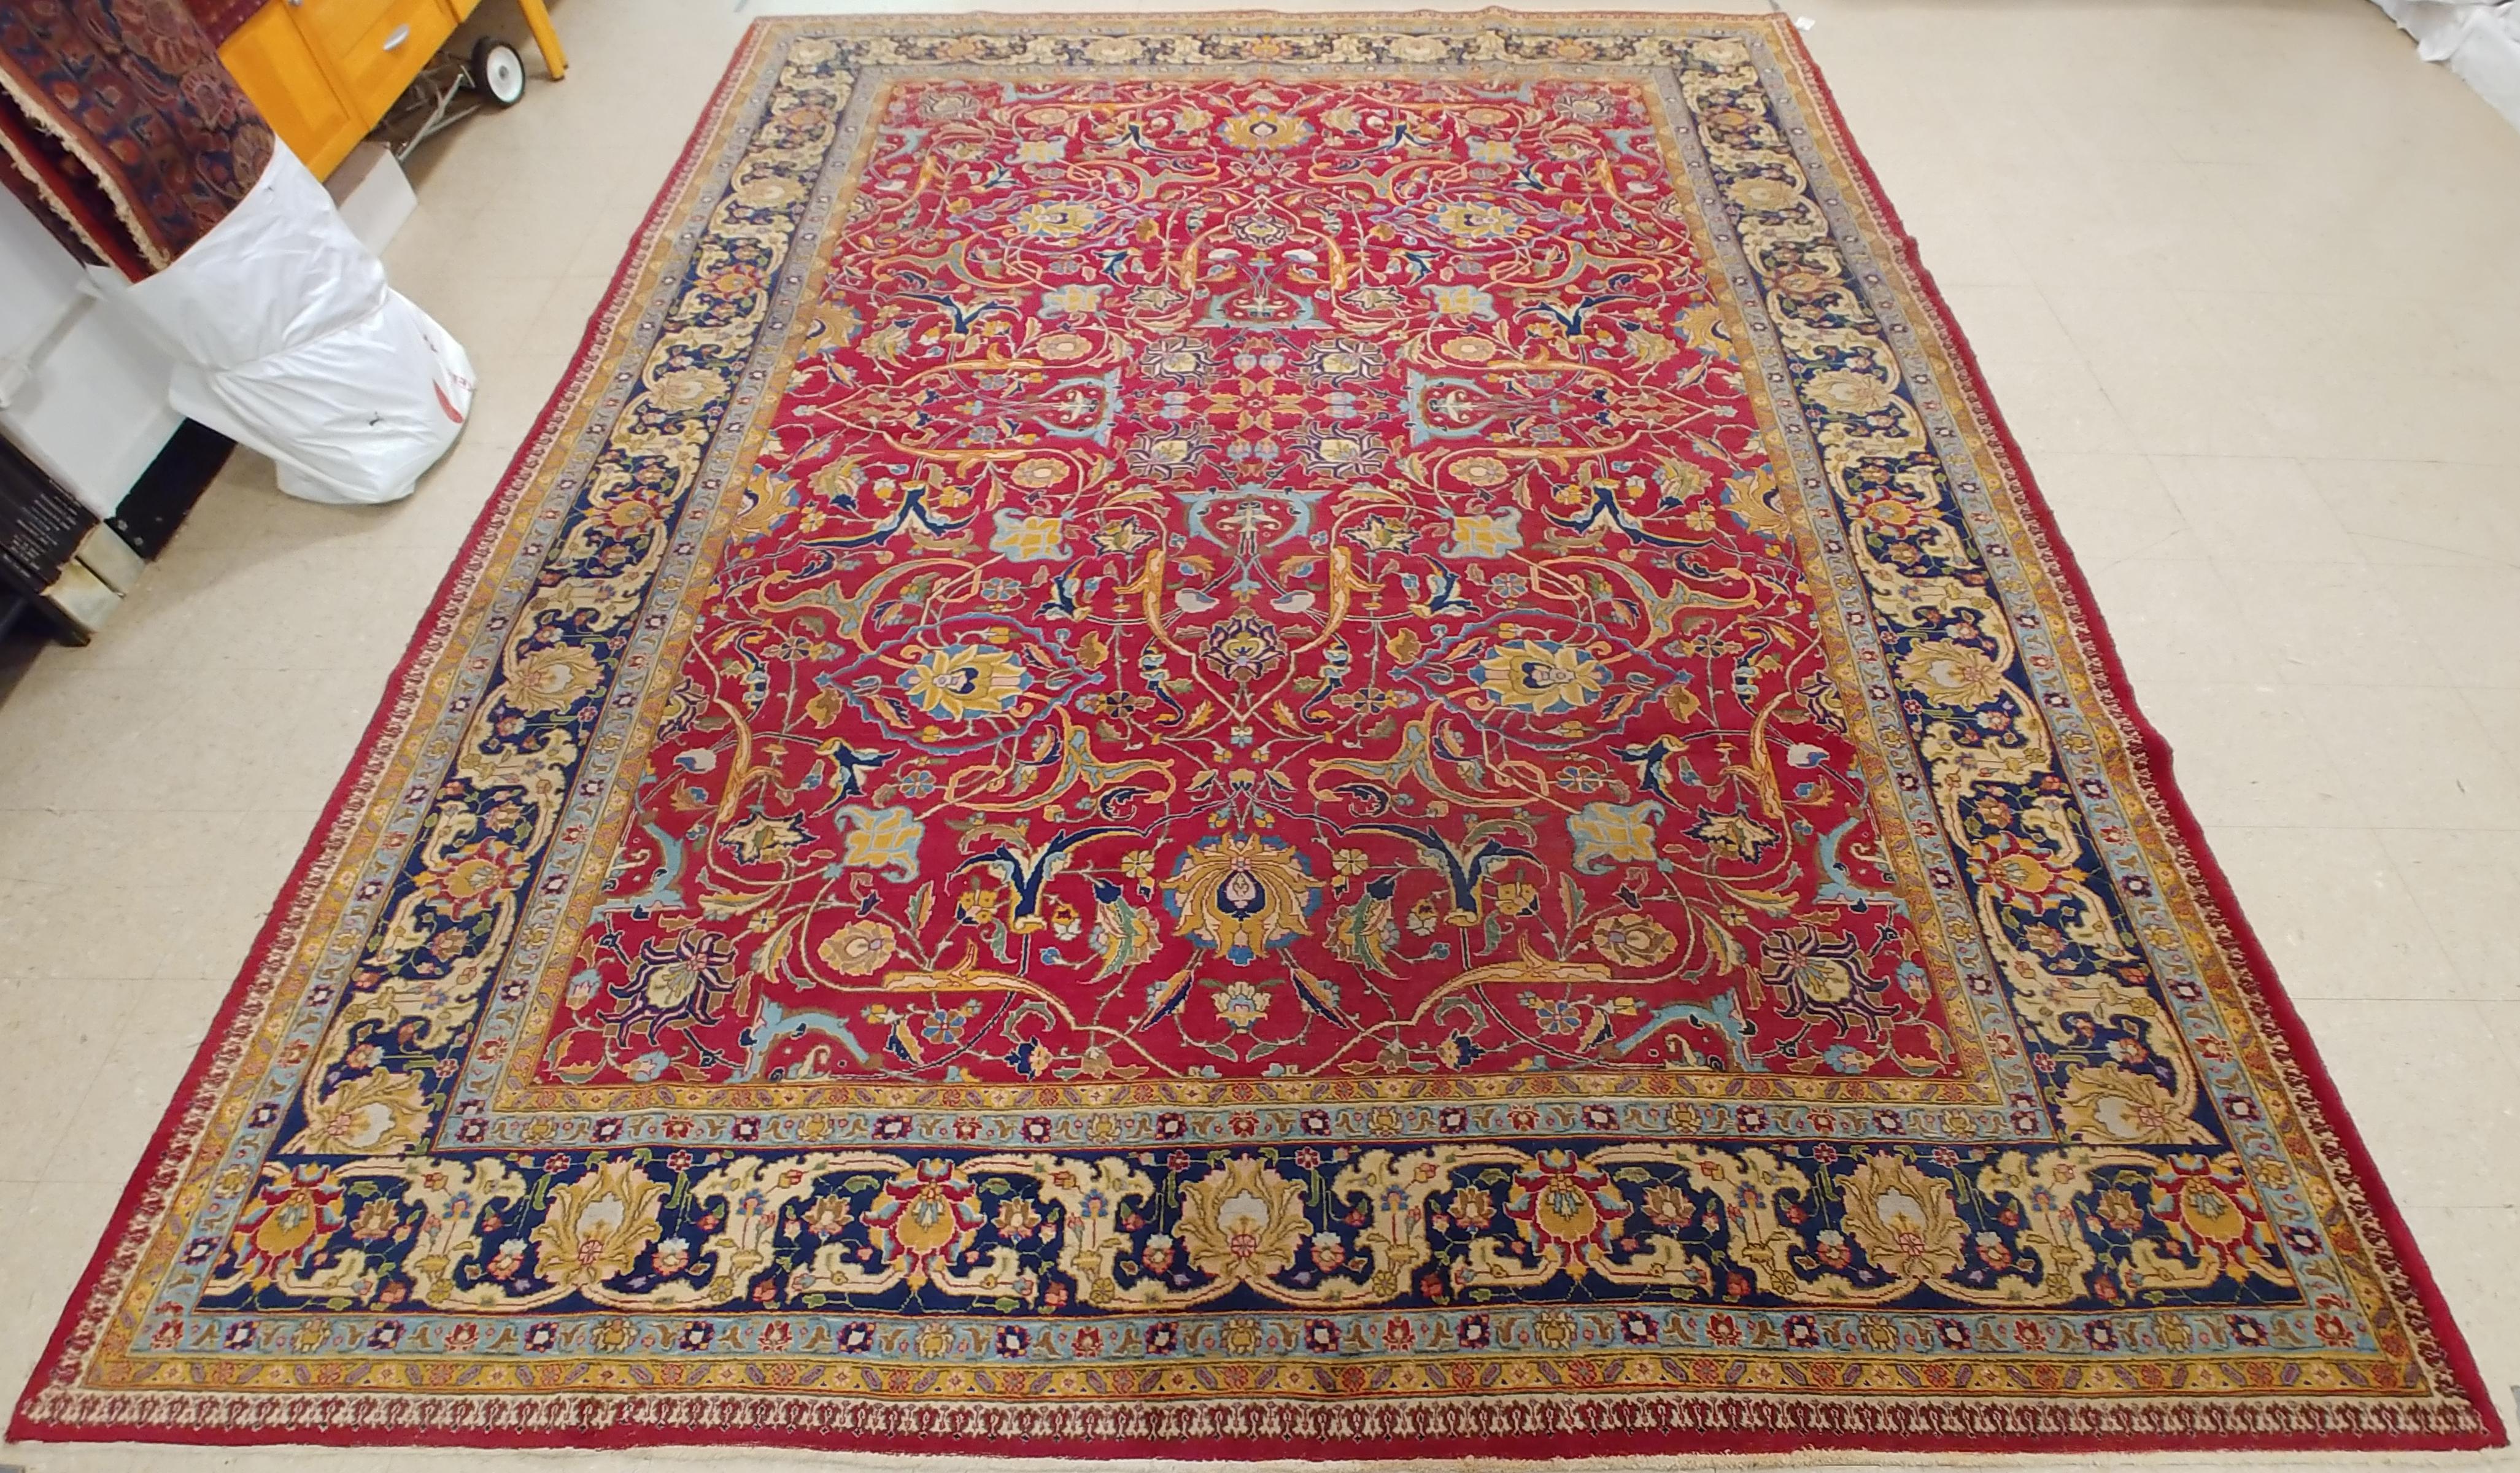 Tabriz is an important weaving center in North West Persia and has been since the 16th century. This city has become one of the leading producers of carpets in the east. In the 19th century, most of these works of art ended up in the American